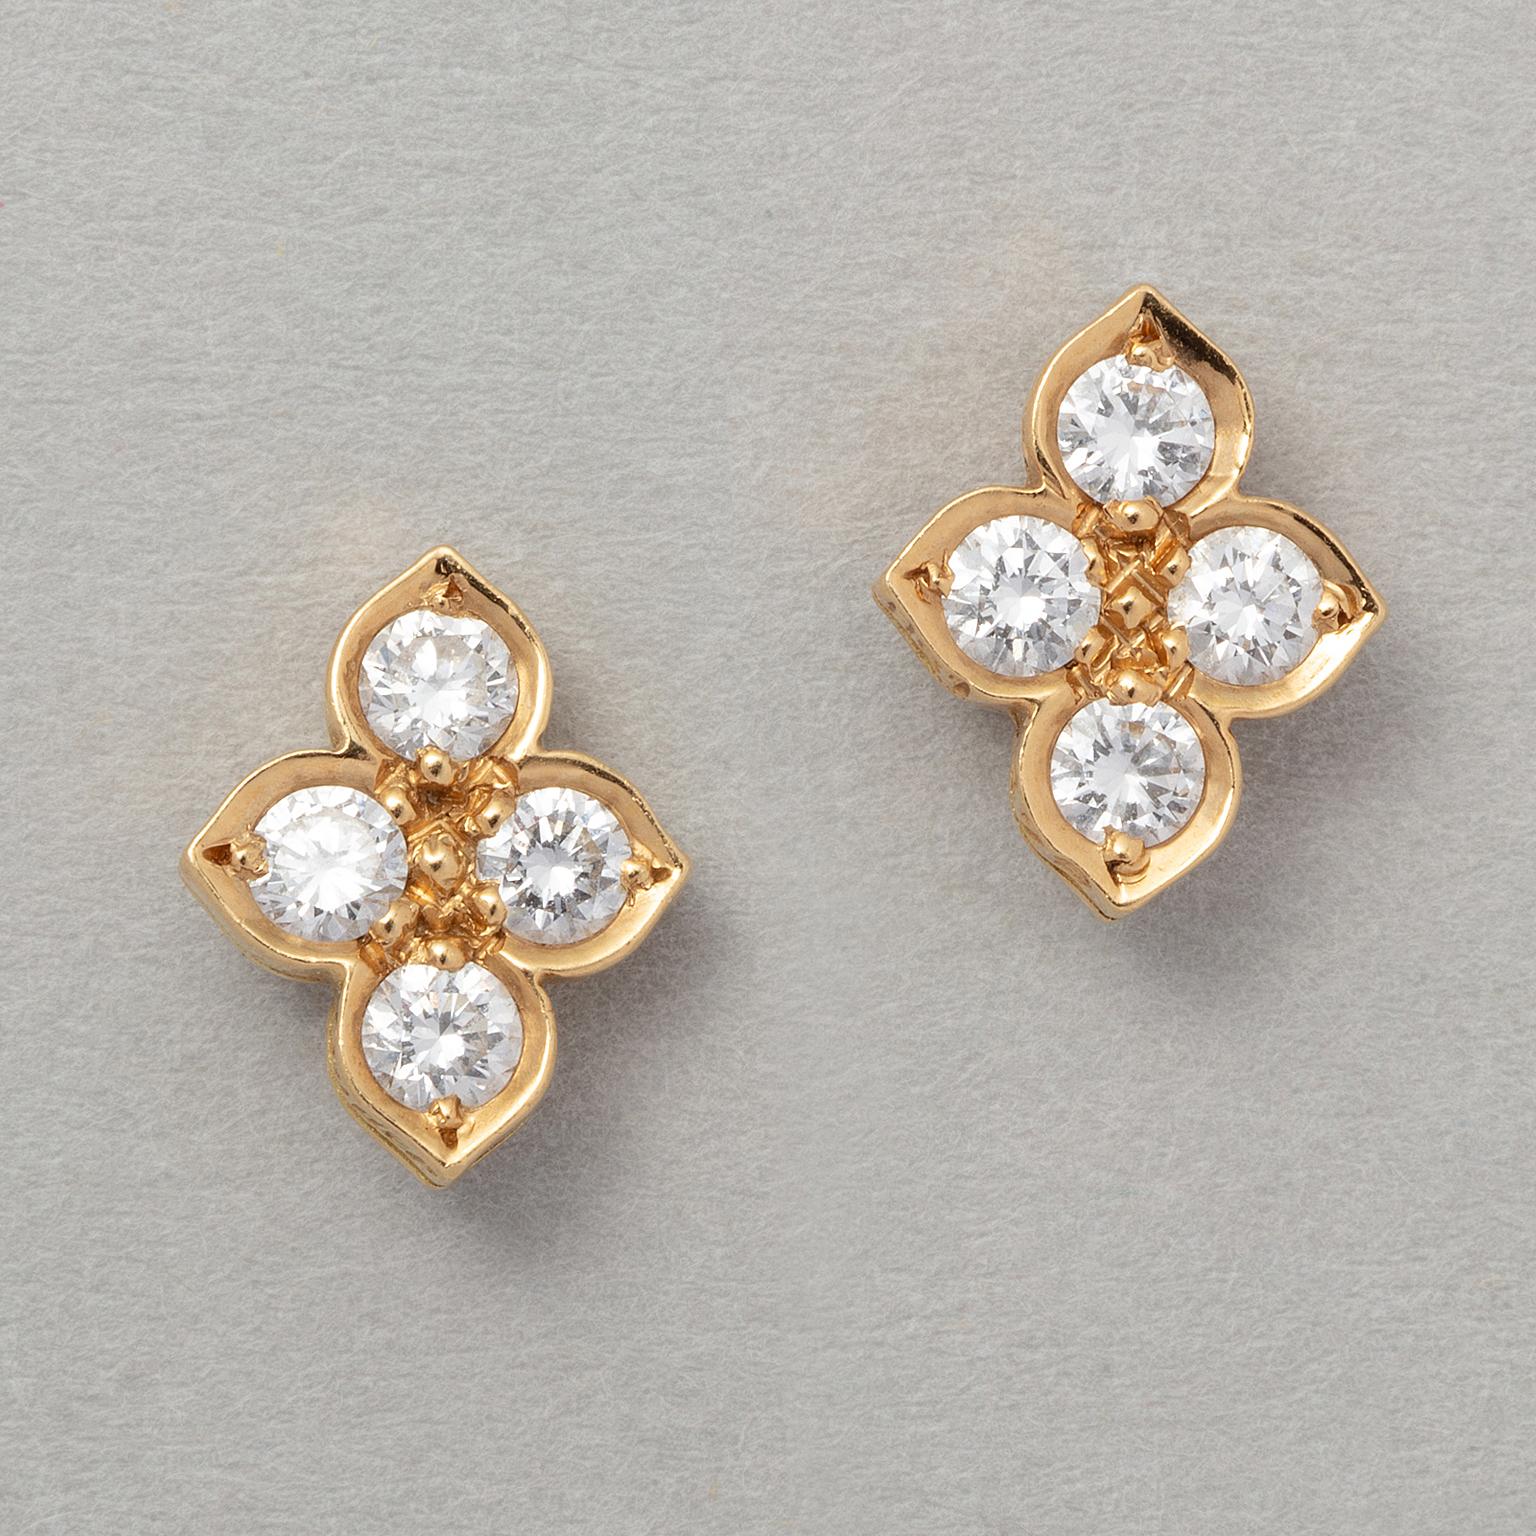 A pair of 18 carat yellow gold stud earrings in the shape of a flower, each set with 4 brilliant cut diamonds (circa 0.56 ct in total). Signed and numbered: Cartier, H61 479.

weight: 2.4 grams
dimensions: 1 x 0.8 cm.